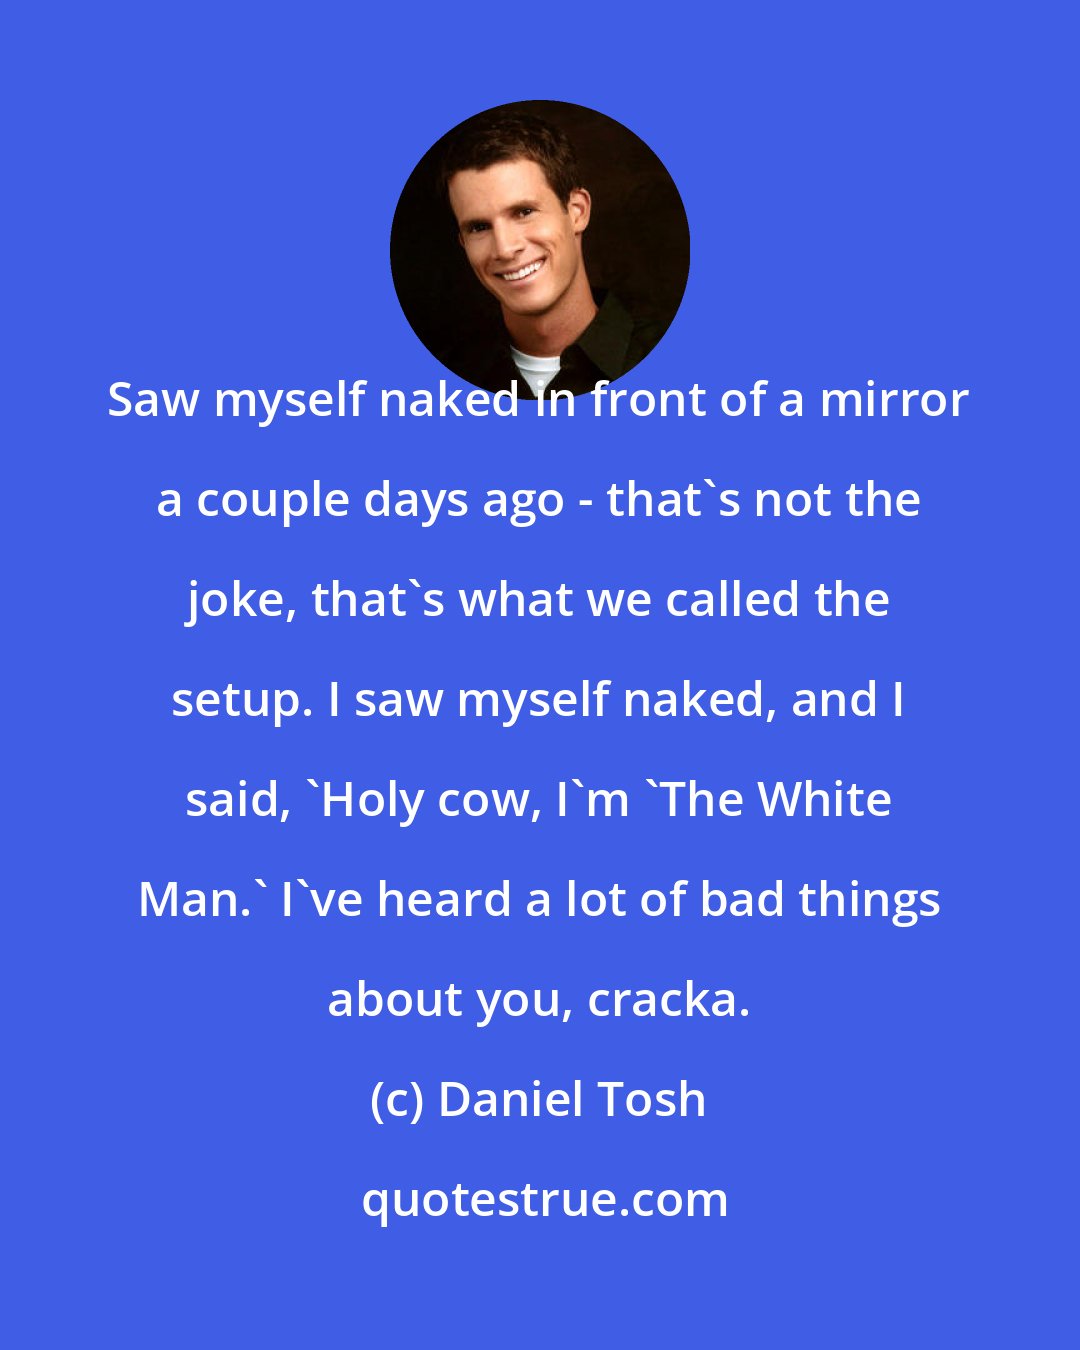 Daniel Tosh: Saw myself naked in front of a mirror a couple days ago - that's not the joke, that's what we called the setup. I saw myself naked, and I said, 'Holy cow, I'm 'The White Man.' I've heard a lot of bad things about you, cracka.